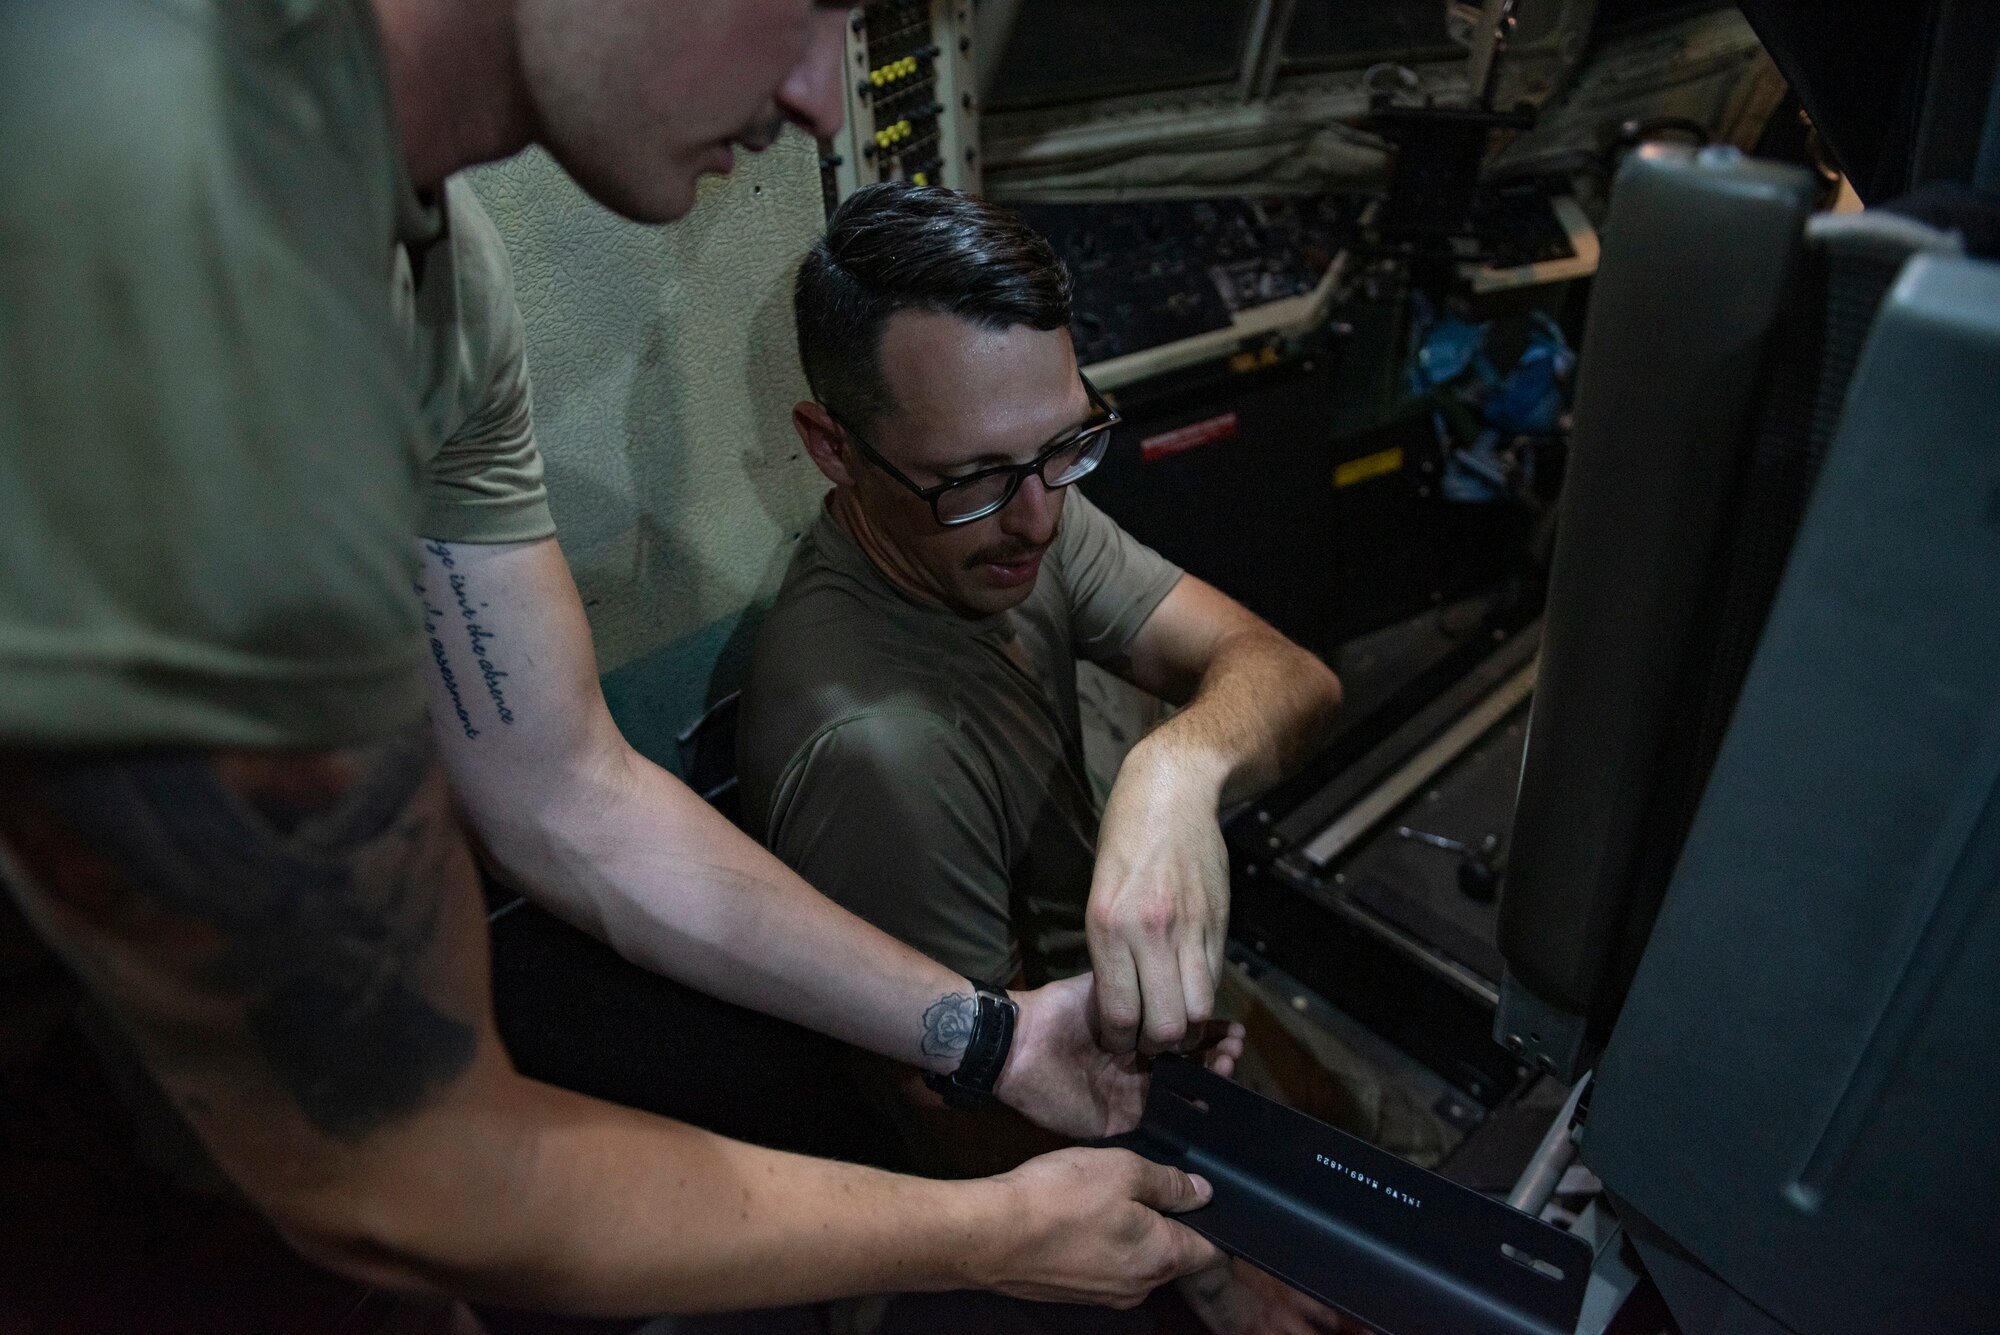 U.S. Air Force Tech. Sgt. Tyler Dowland, a crew chief assigned to the 386th Expeditionary Aircraft Maintenance Squadron and deployed from Maxwell Air Force Base, Alabama, hands bolts from a C-130 Hercules panel to U.S. Air Force Senior Airman Christian Pettus, a crew chief assigned to the 386th EAMXS and deployed from Maxwell AFB, at Ali Al Salem Air Base, Kuwait, July 20, 2021. The EAMXS works 24-hour operations year-round to keep the C-130 Hercules in flight to accomplish the mission of fight to win today and to provide warfighter support in the area of responsibility. (U.S. Air Force Photo by Senior Airman Helena Owens)